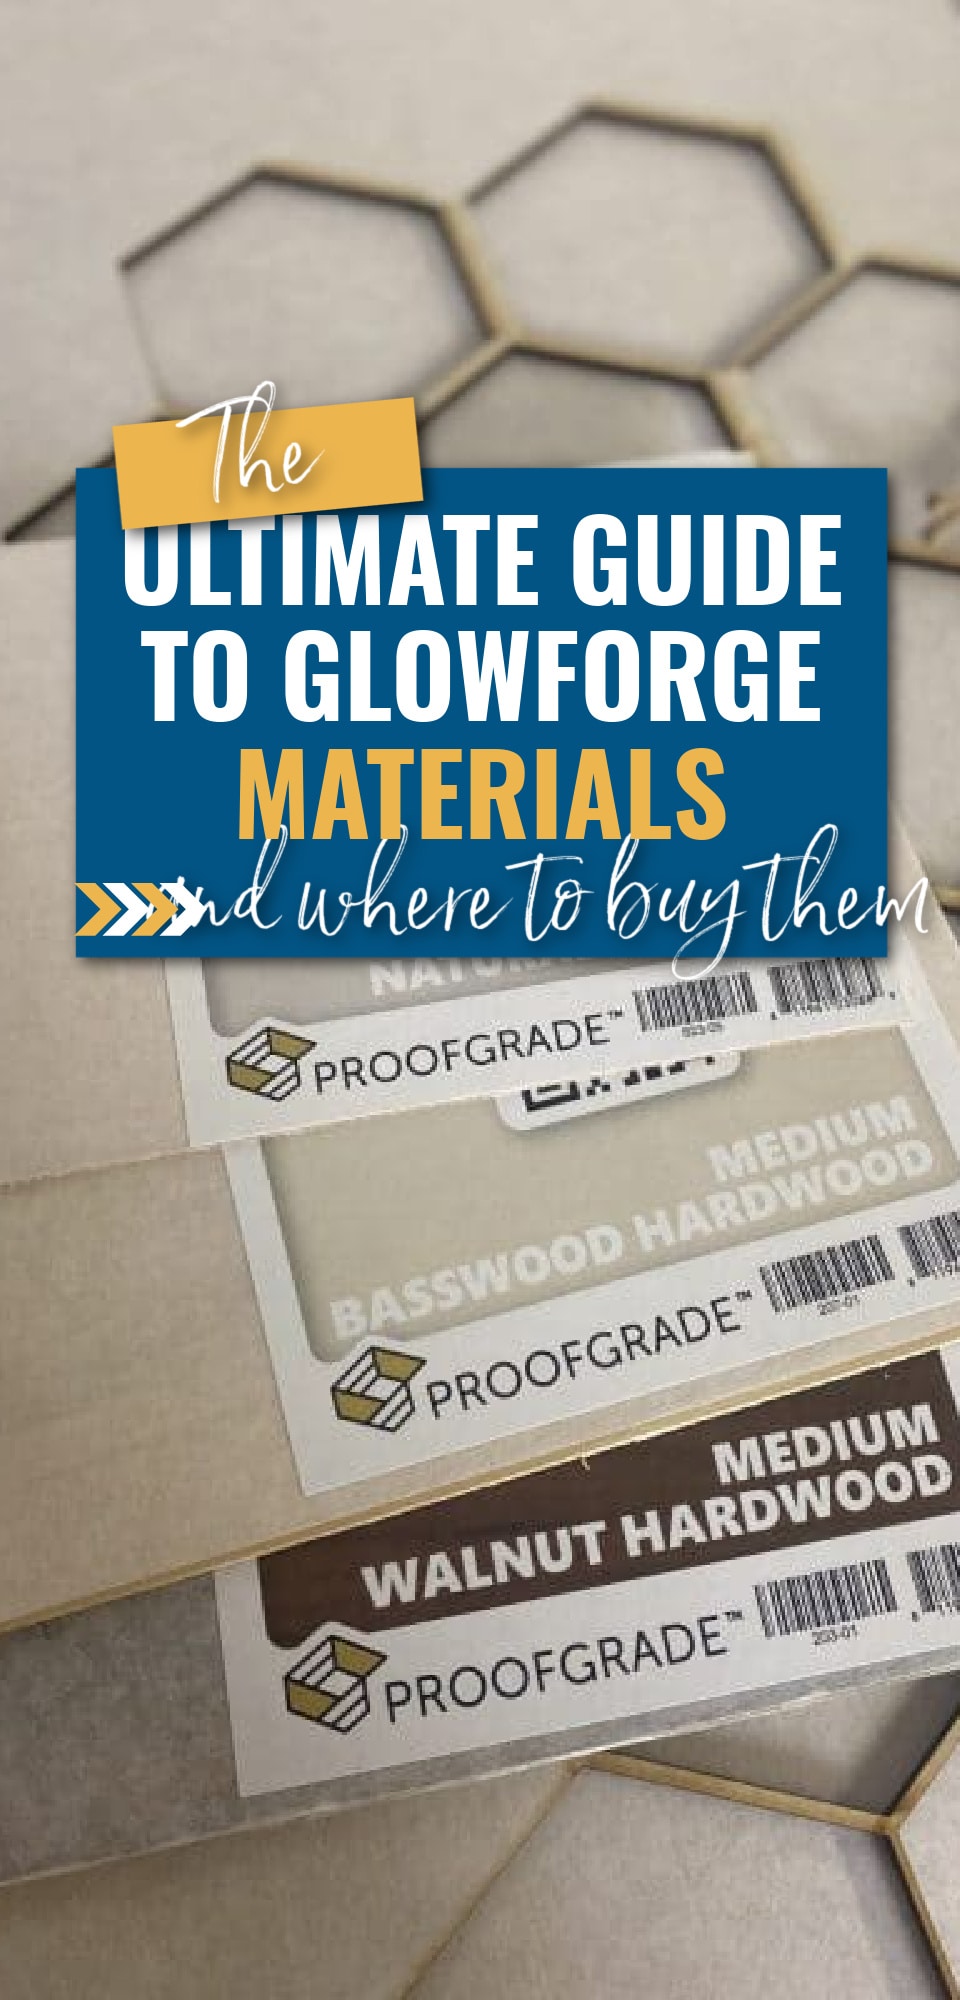 Make Your Own Glowforge Material! 